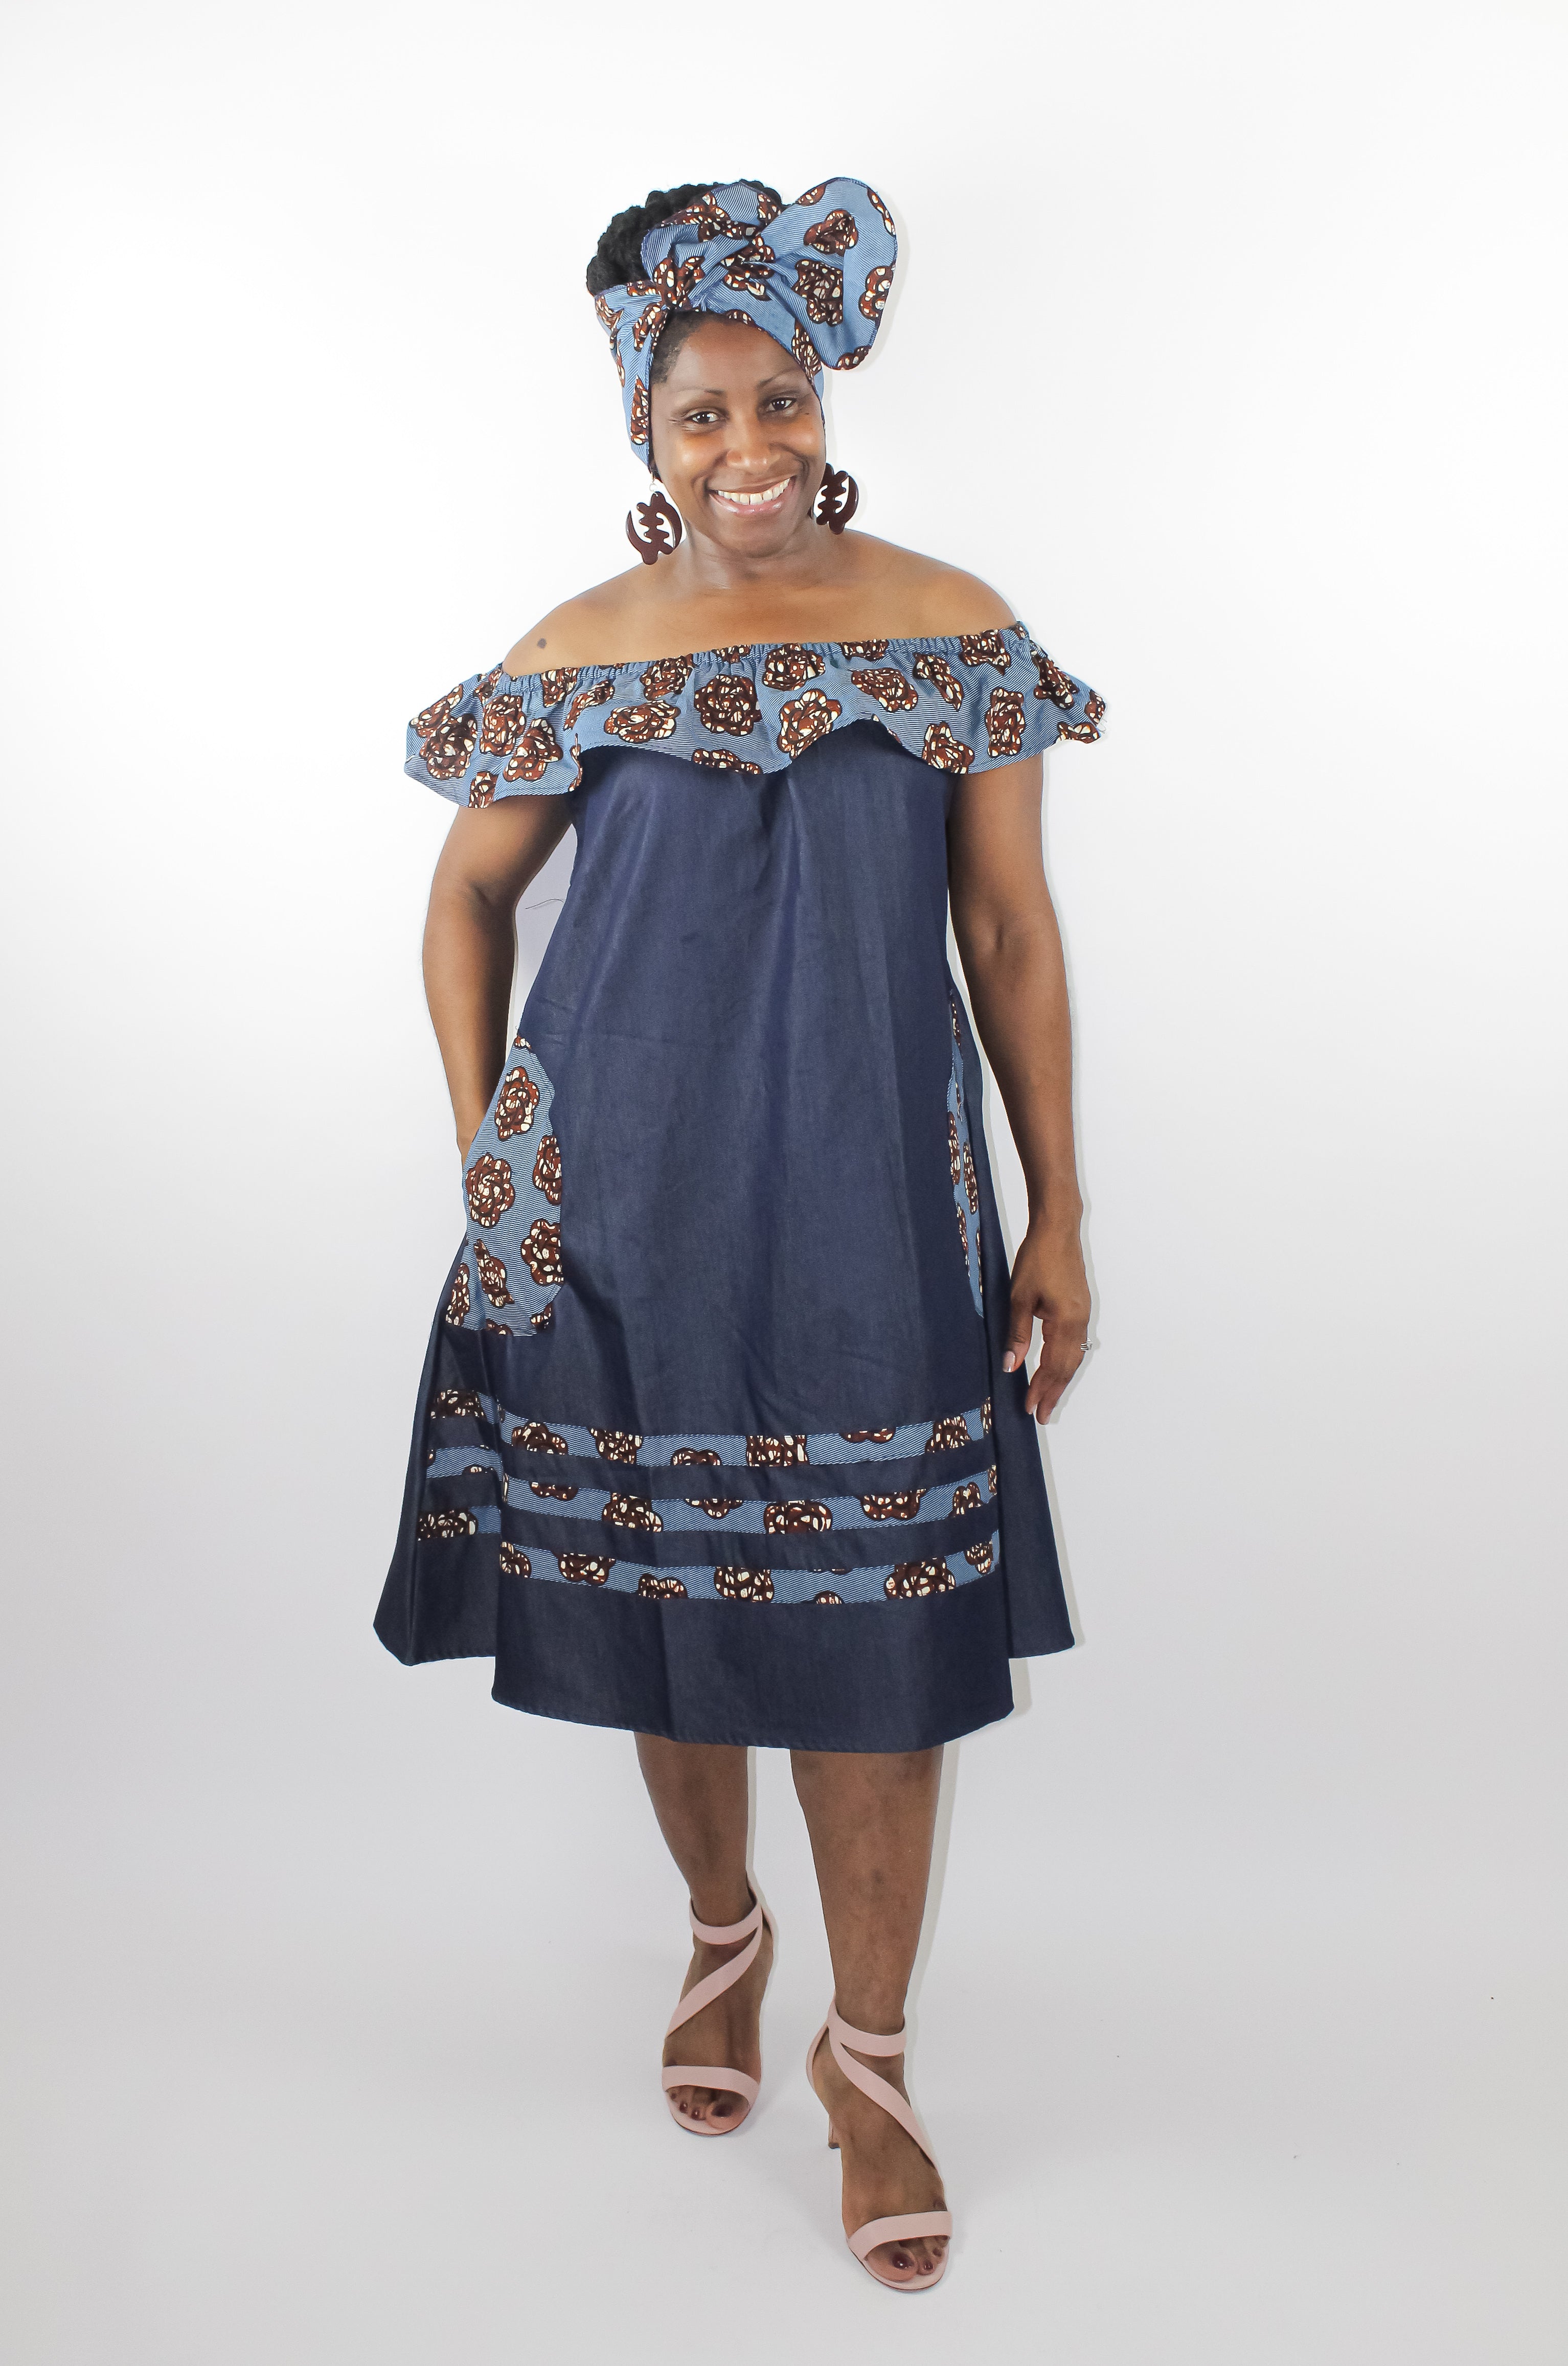 Denim & african print off the shoulder dress with matching head wrap